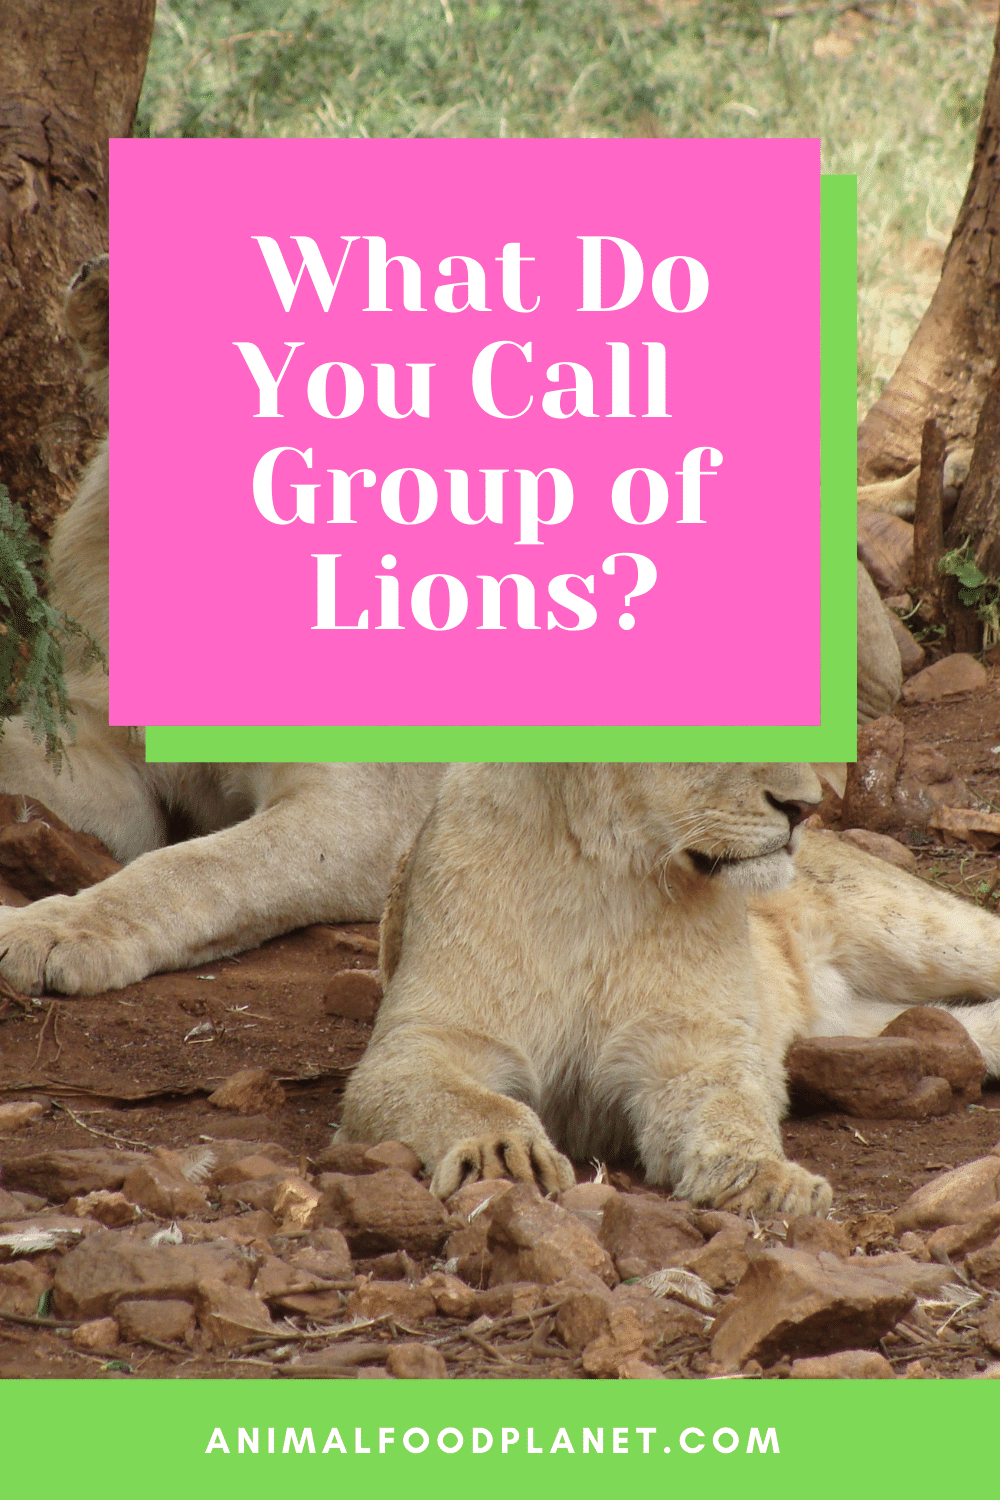 What Do You Call Group of Lions